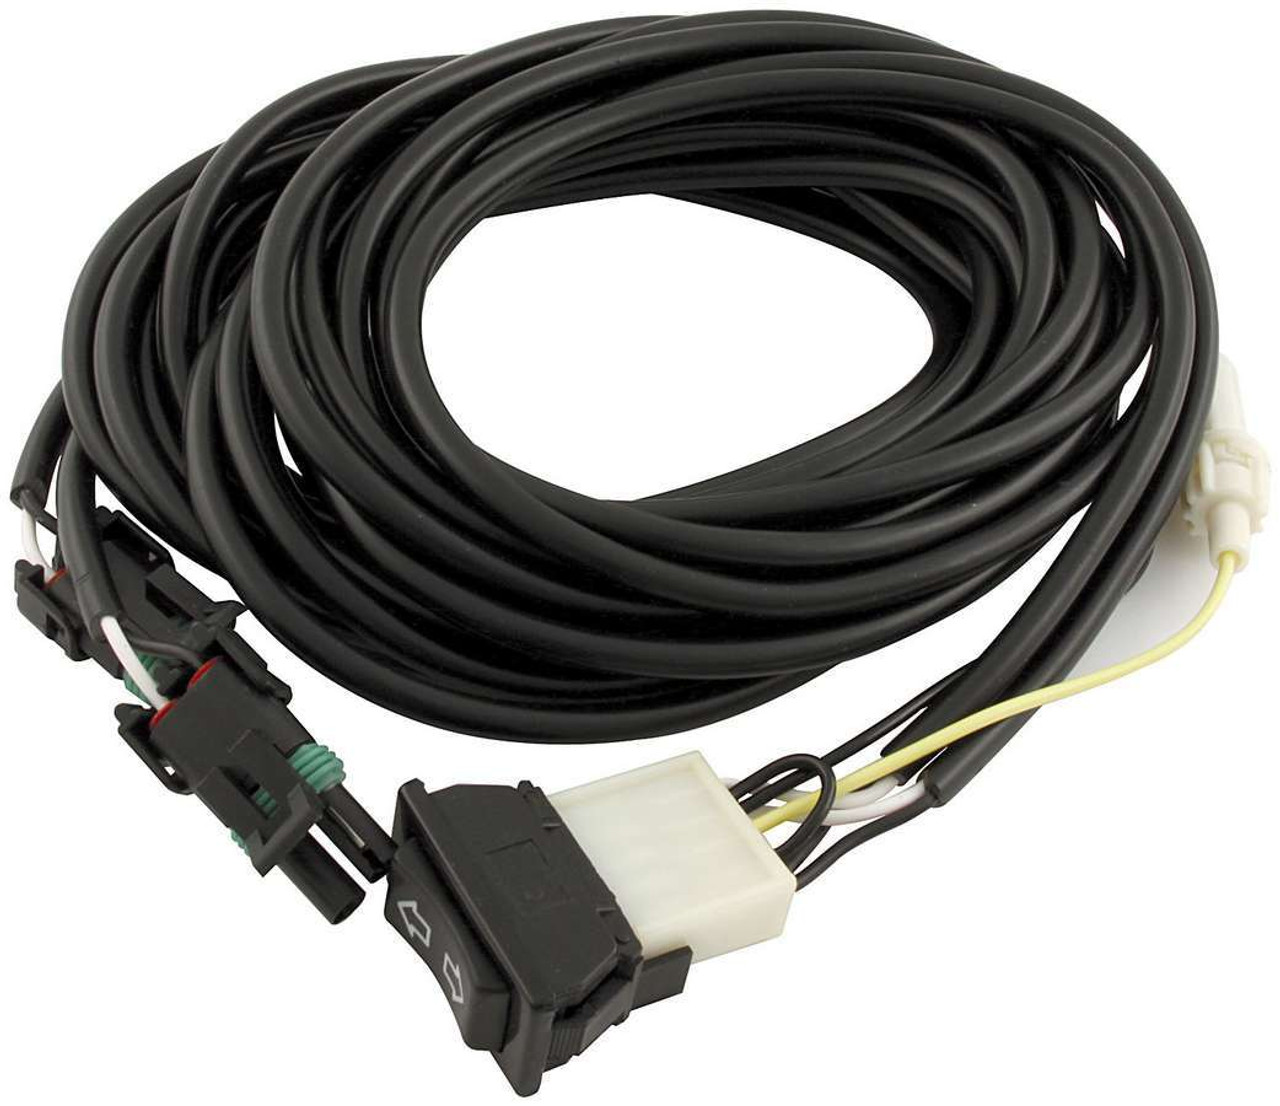 Dual Wire Harness for Exhaust Cutouts 13ft